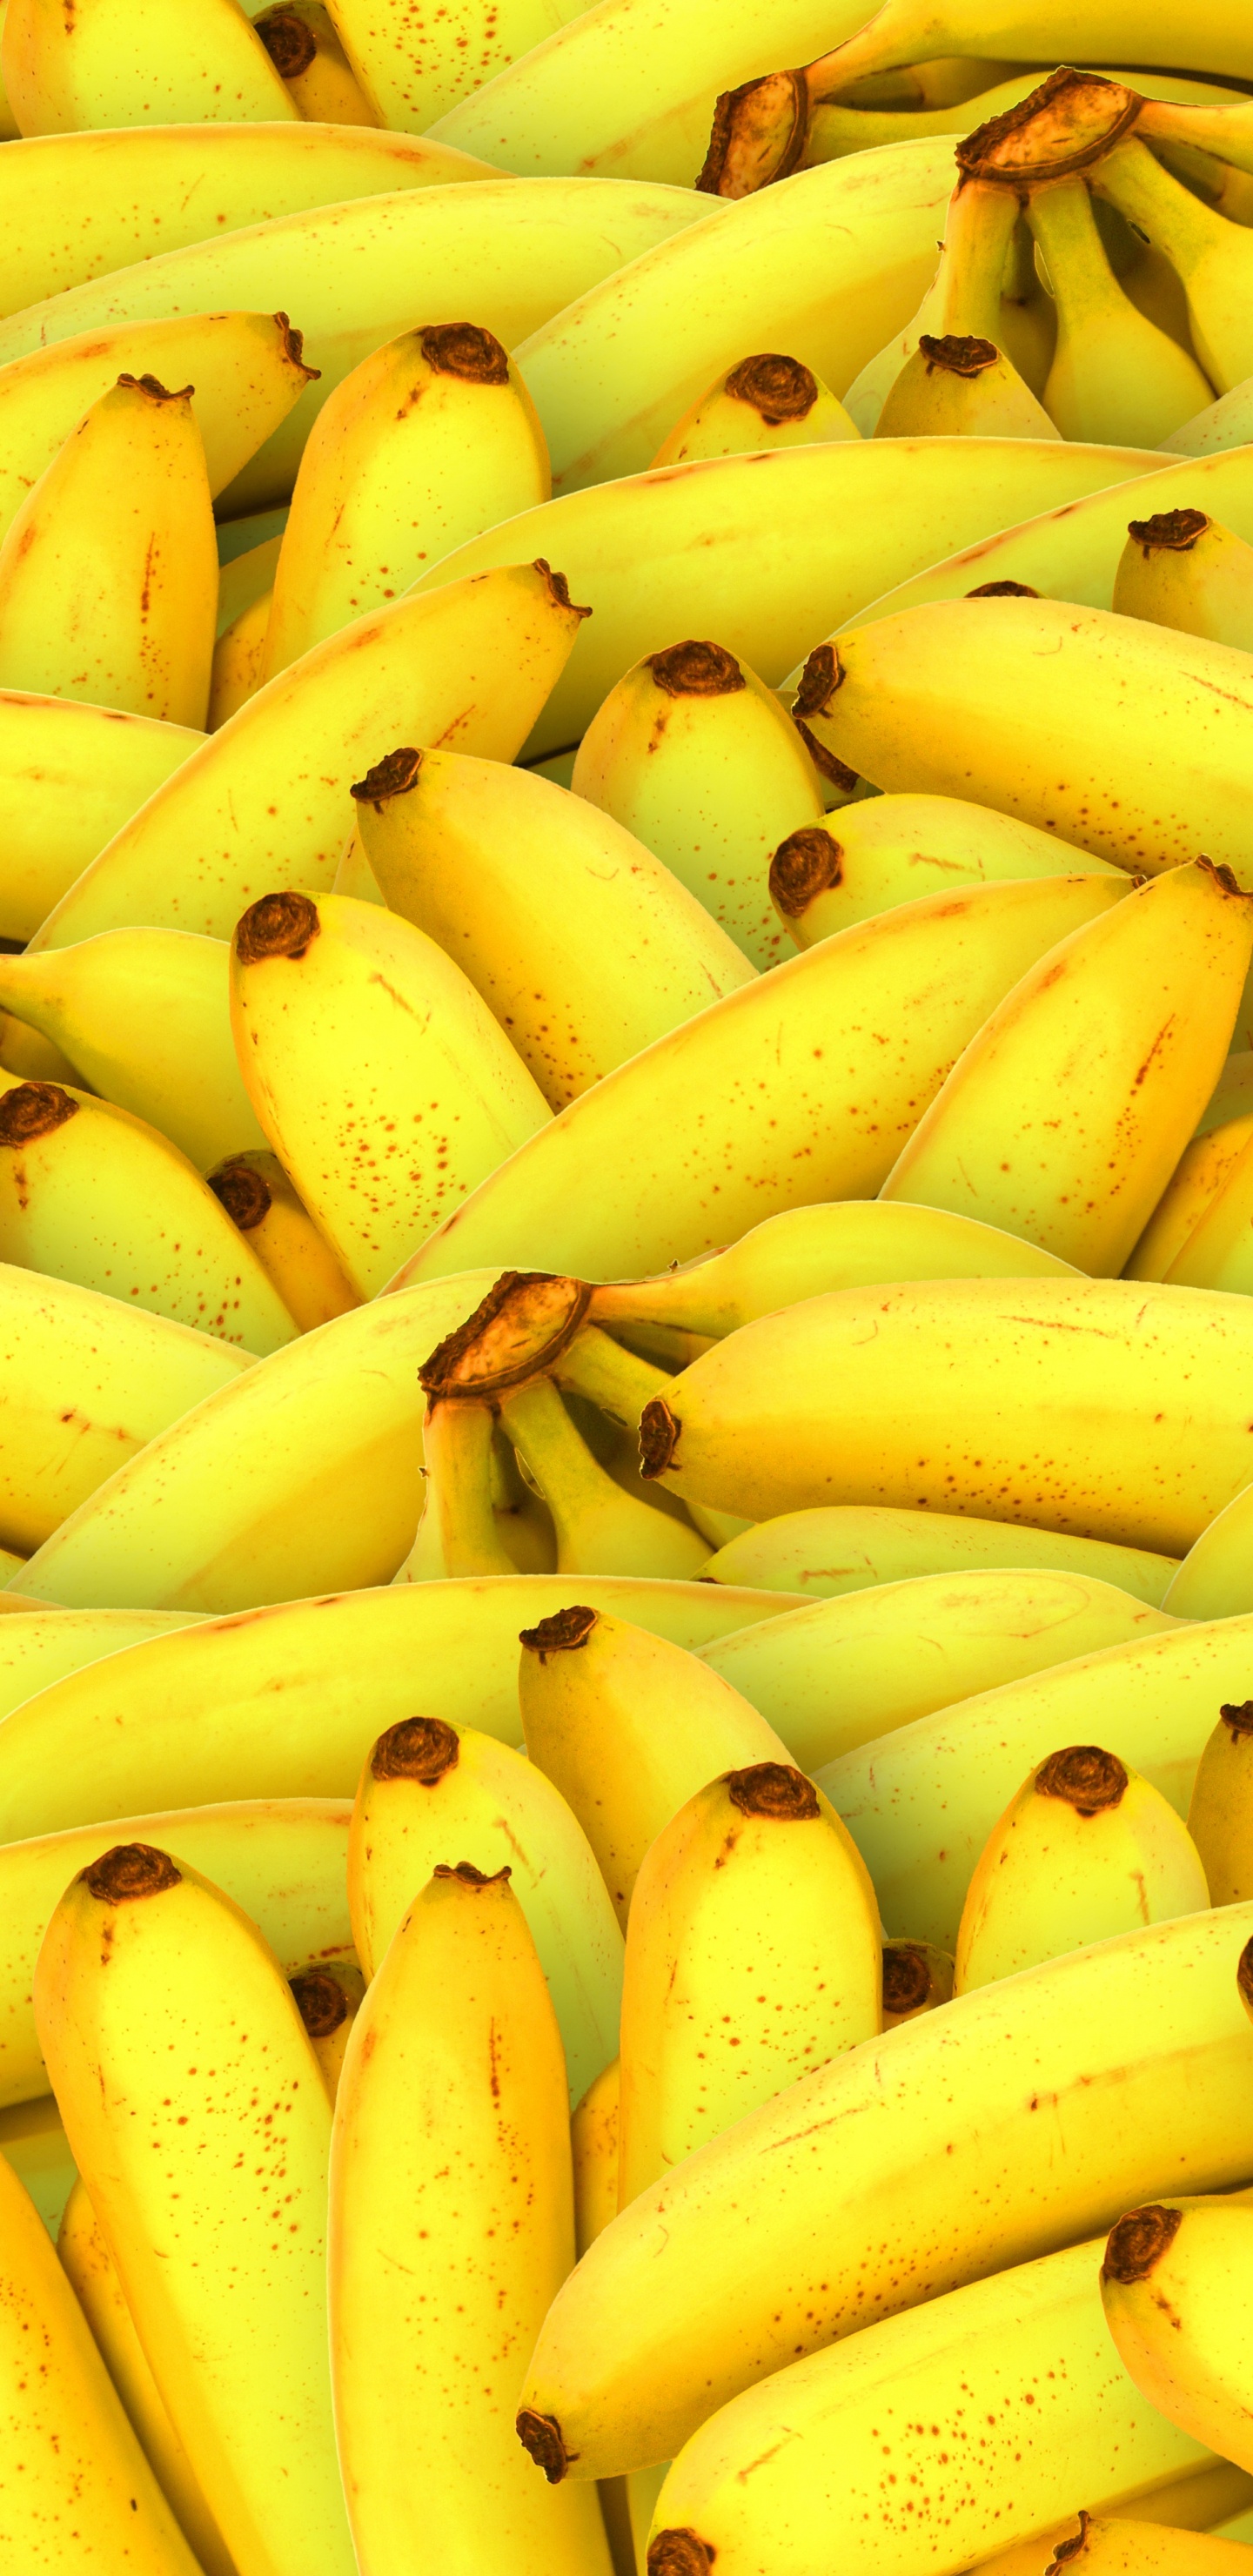 Yellow Banana Fruit on Brown Wooden Table. Wallpaper in 1440x2960 Resolution